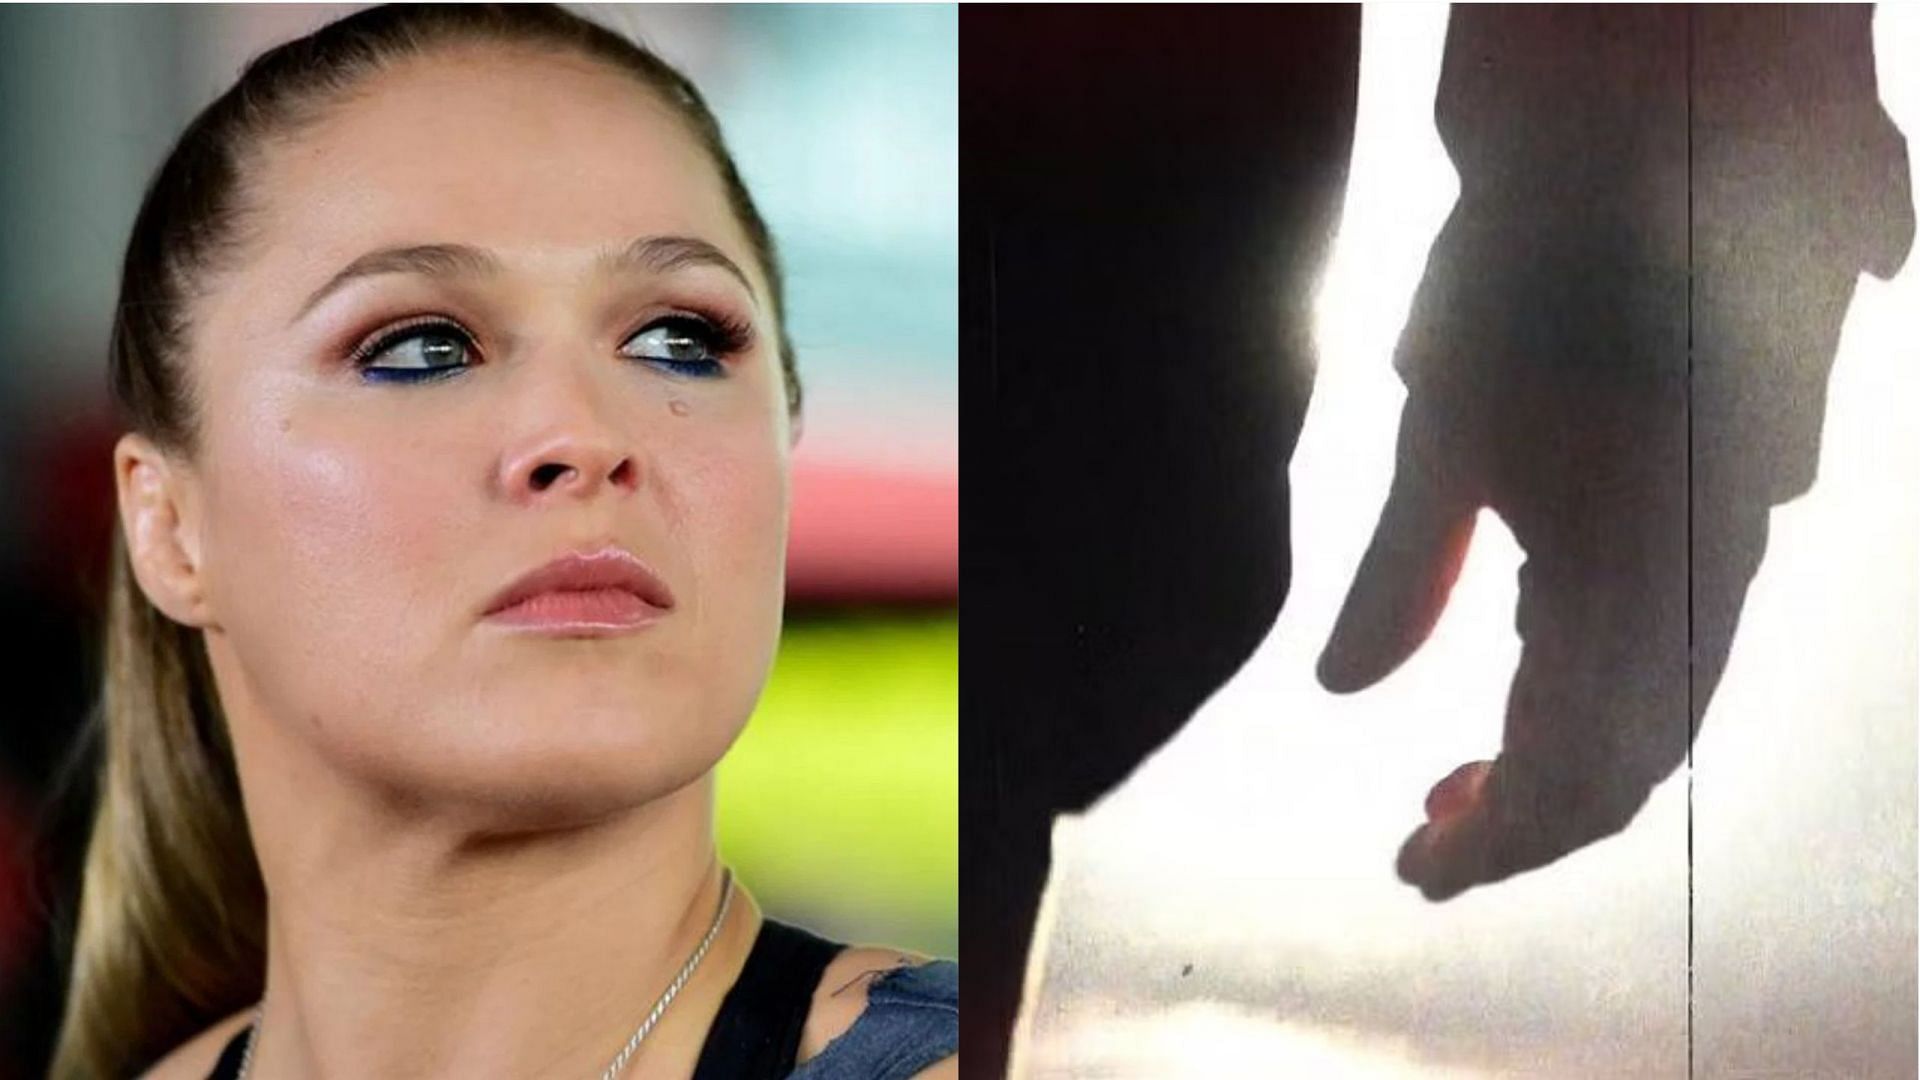 Ronda Rousey (left); Mystery star (right)